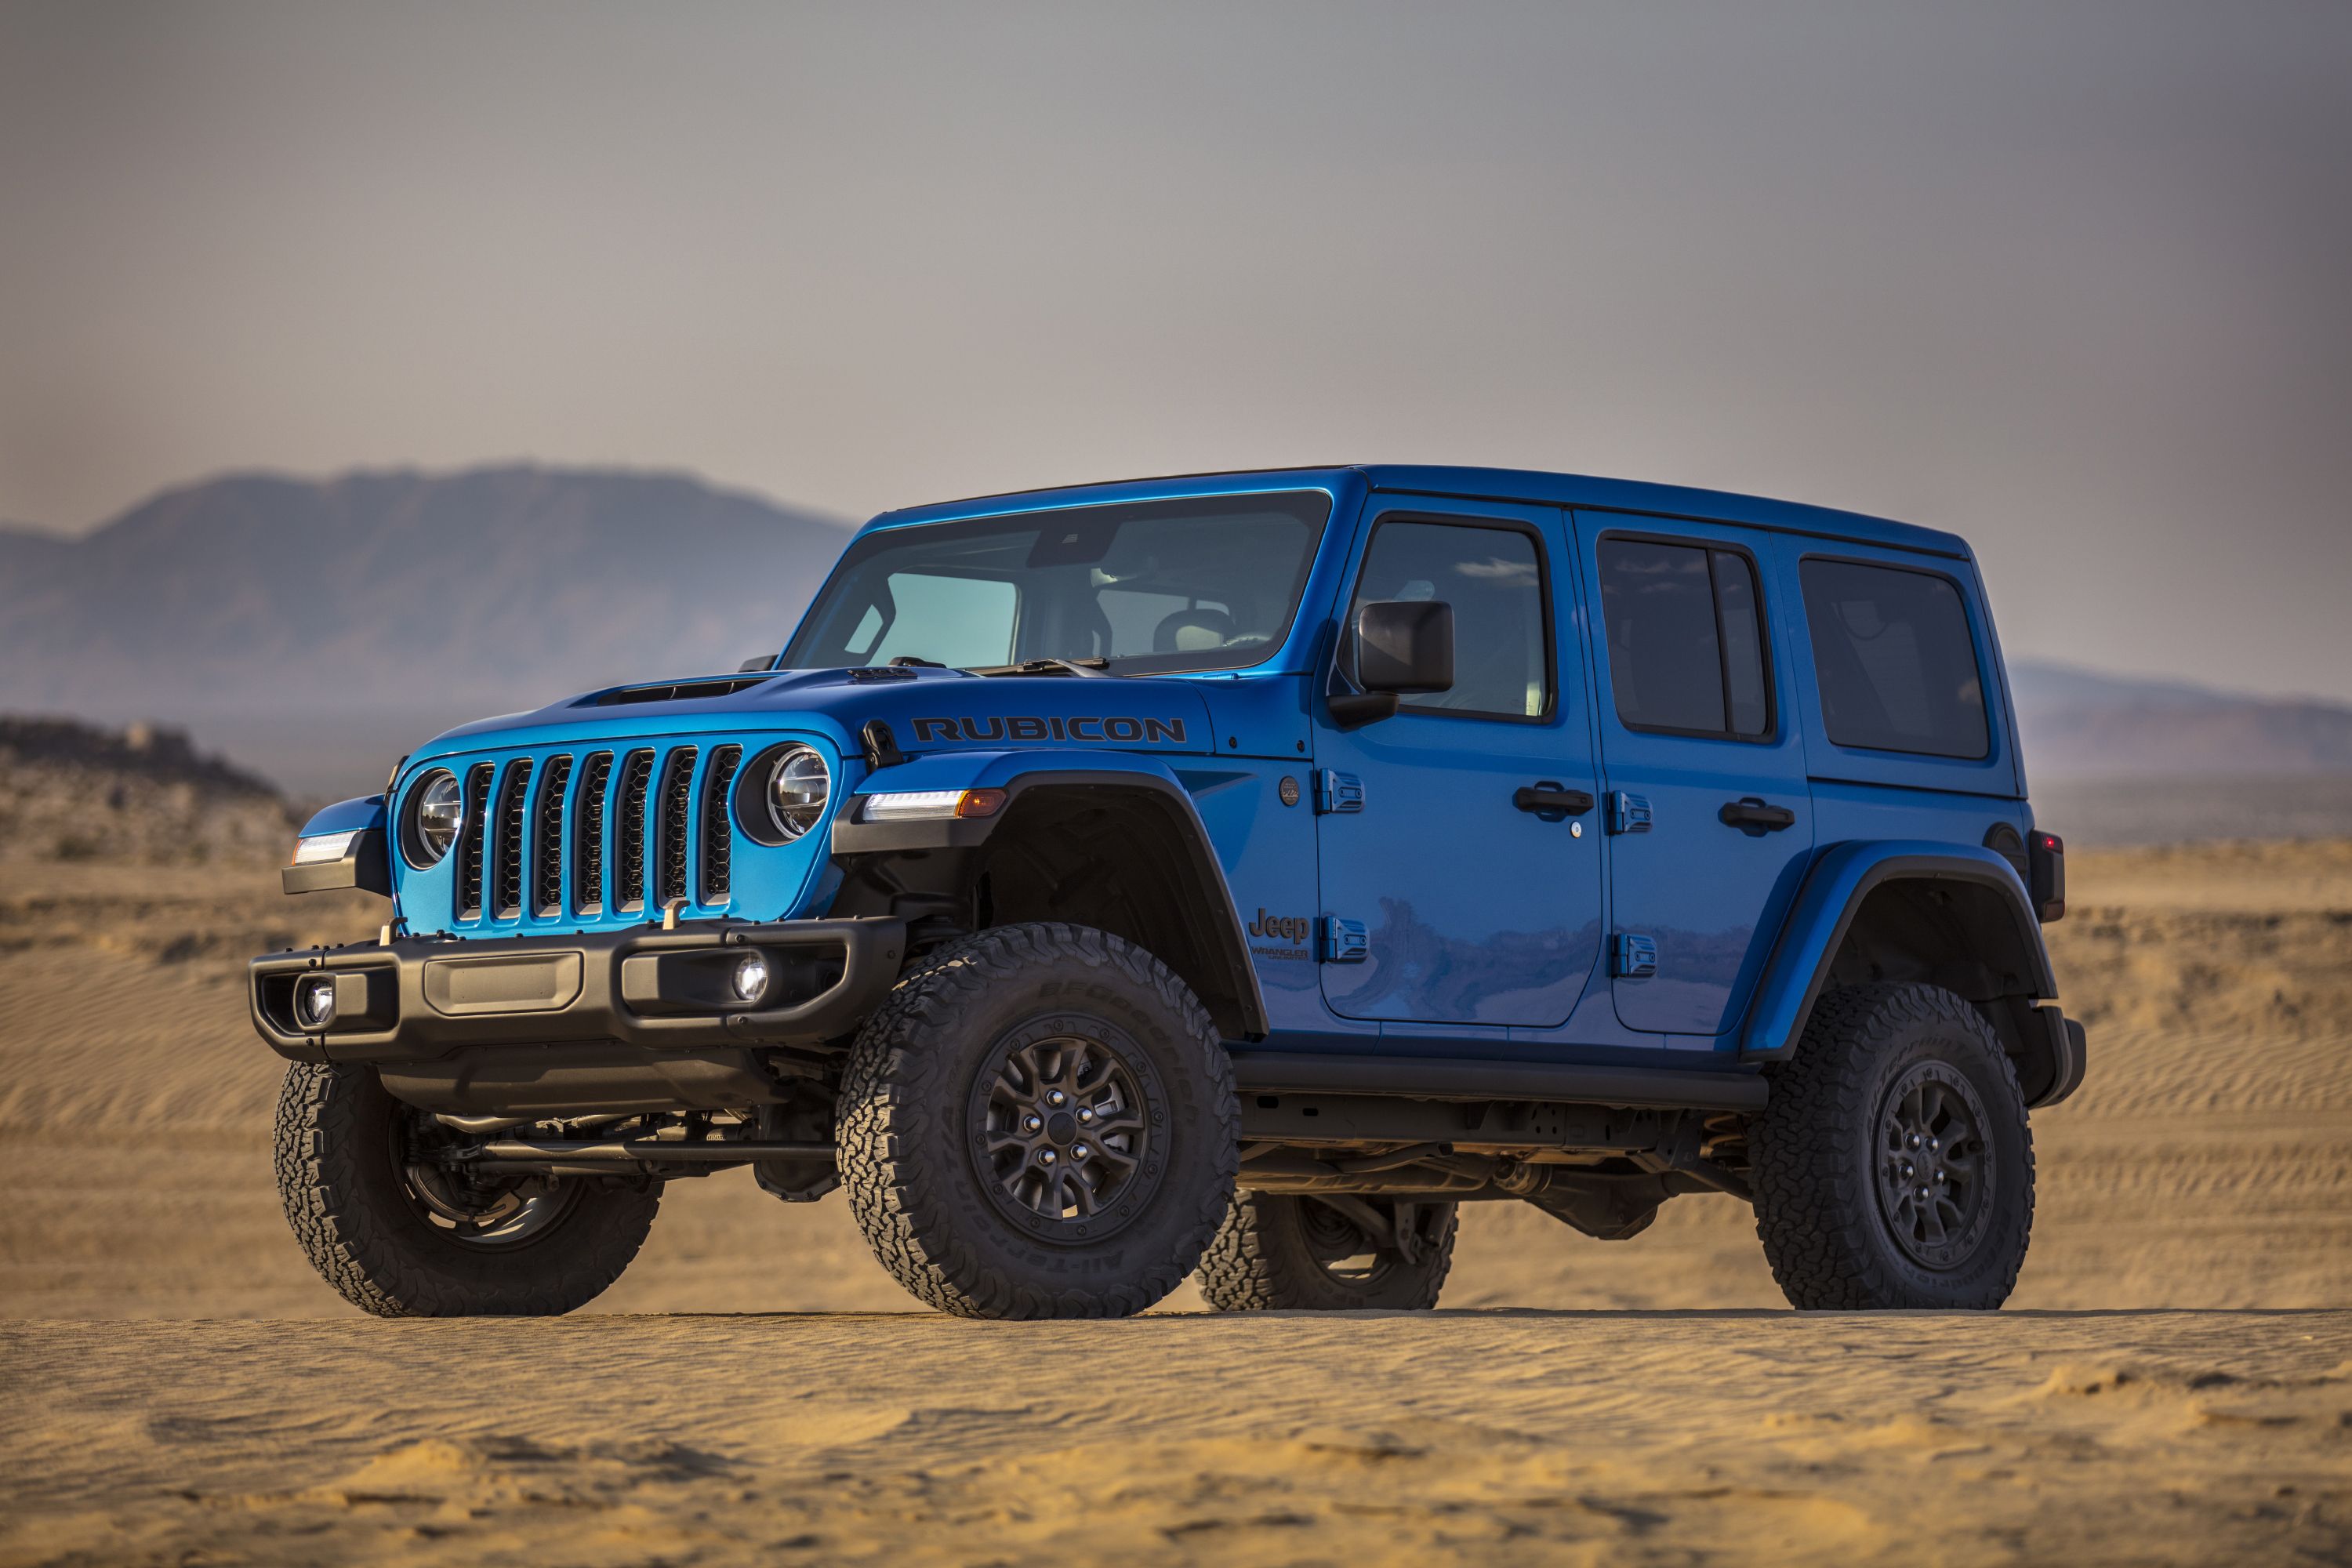 2021 Jeep Wrangler price and specs: Two-door Rubicon returns as permanent  variant - Drive